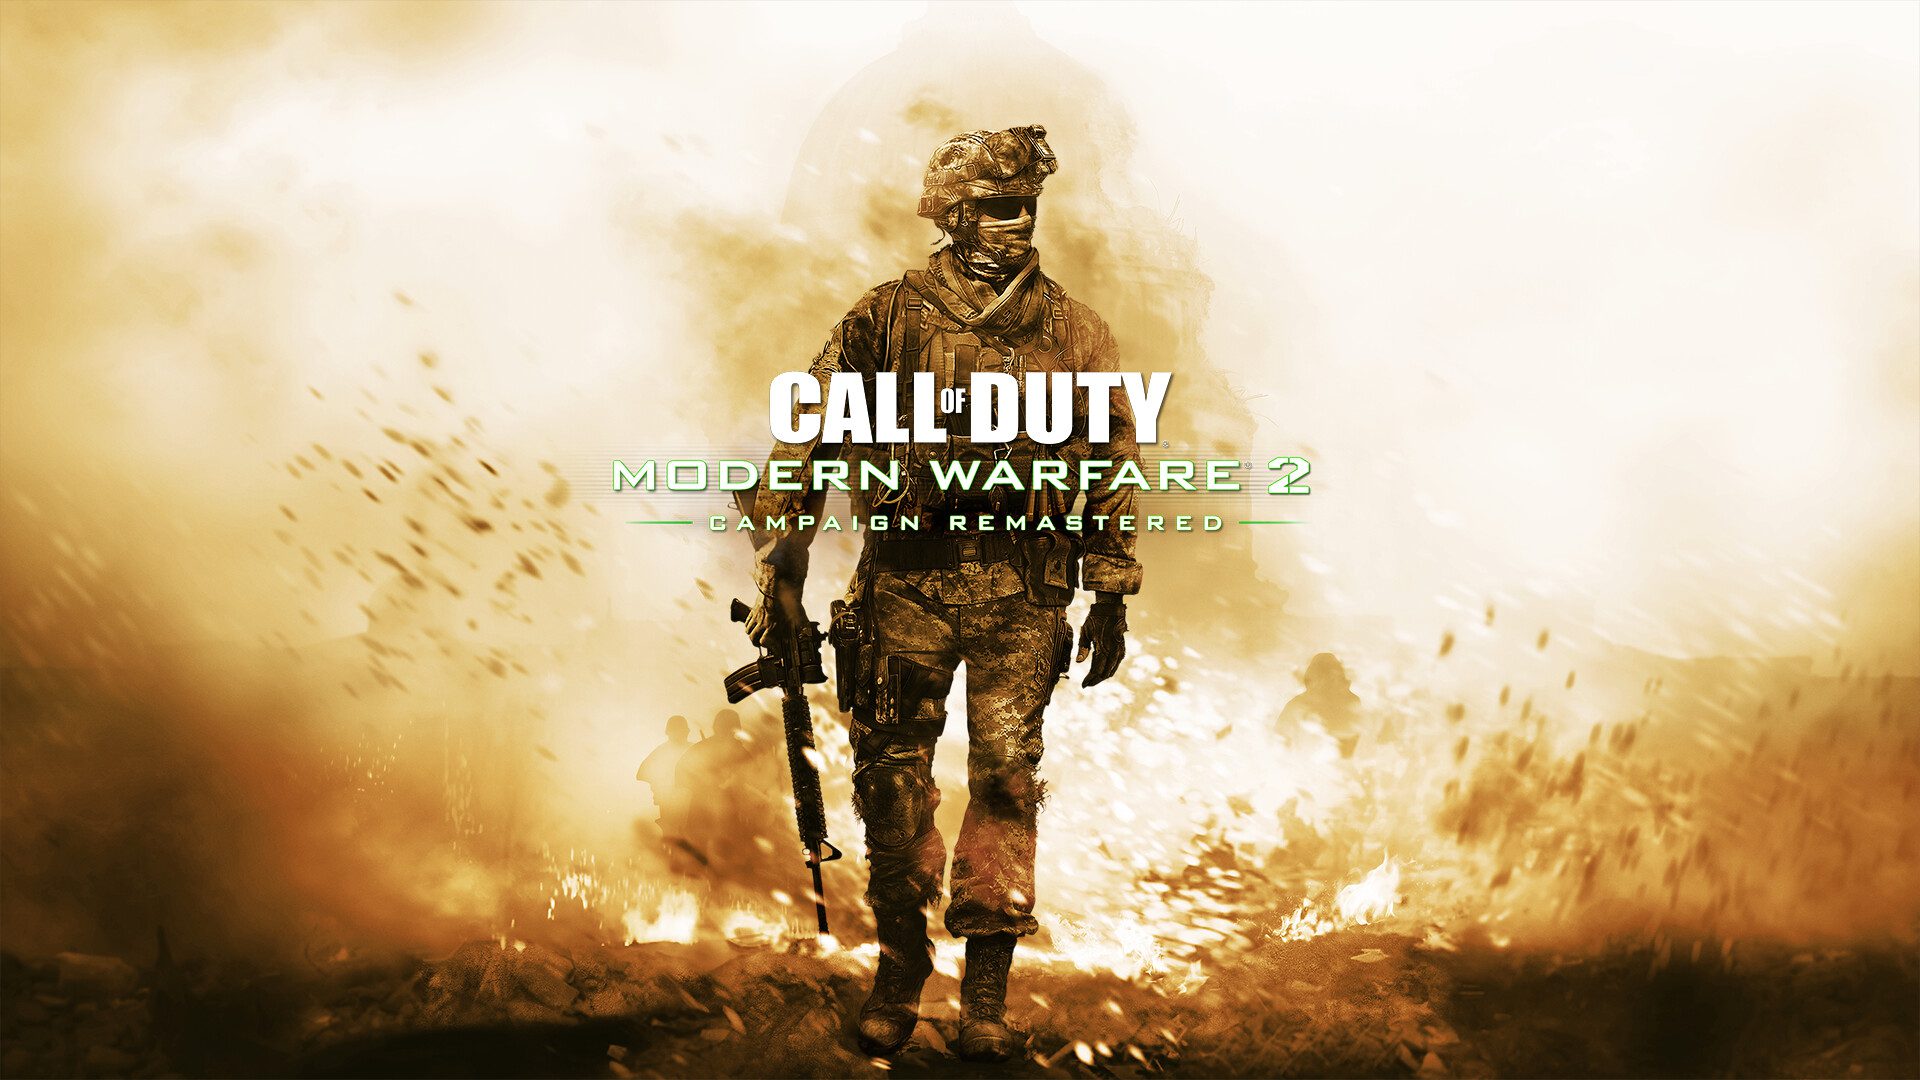 Call of Duty Modern Warfare 2 Campaign Remastered on PS4